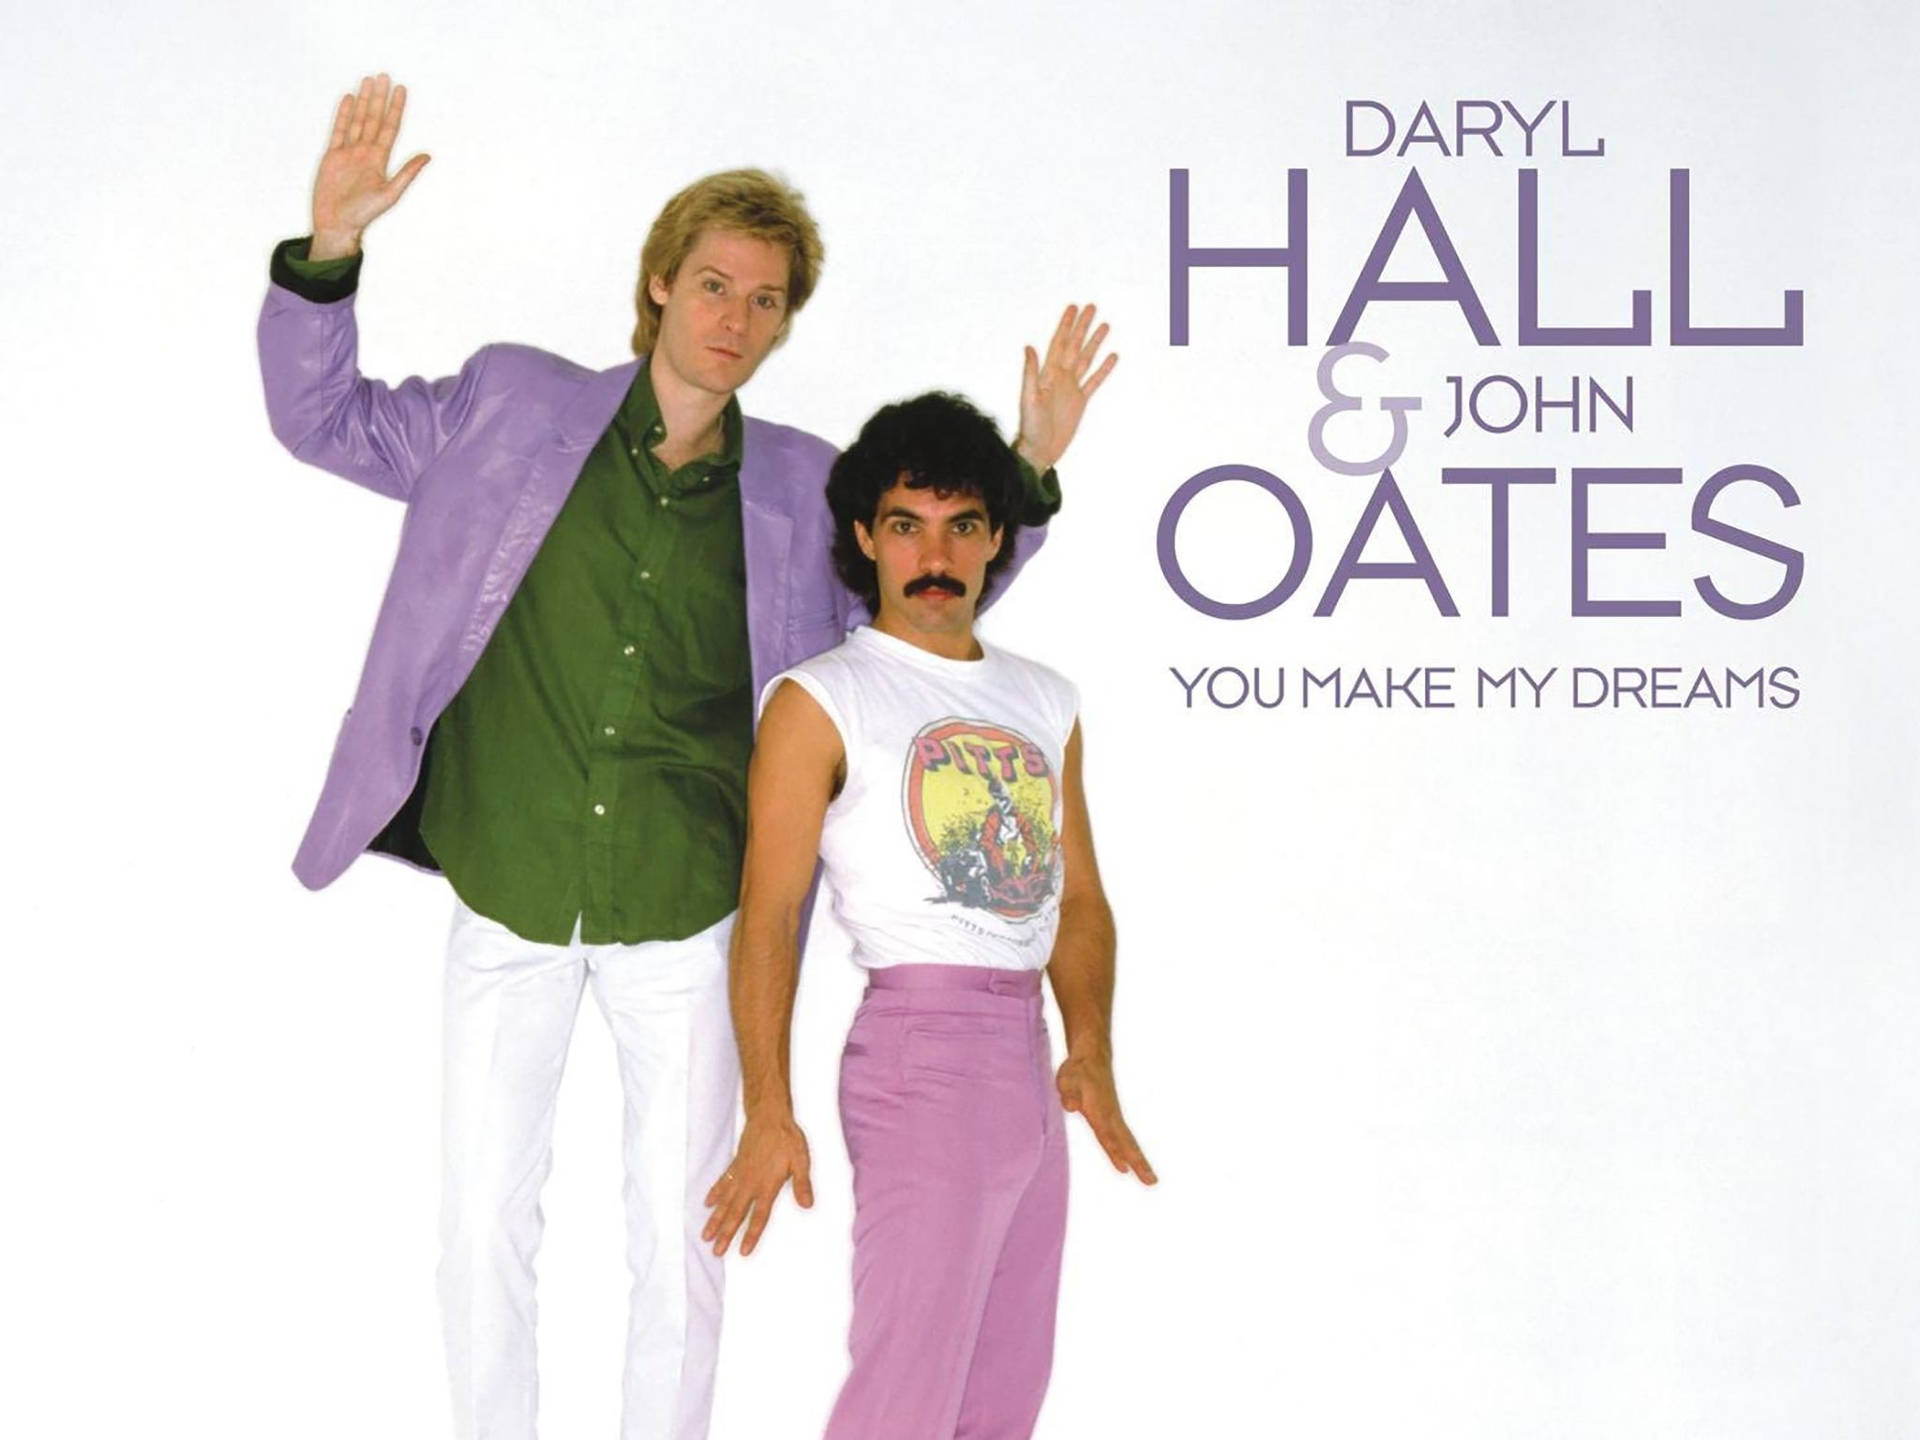 Daryl Hall John Oates You Make My Dreams Picture